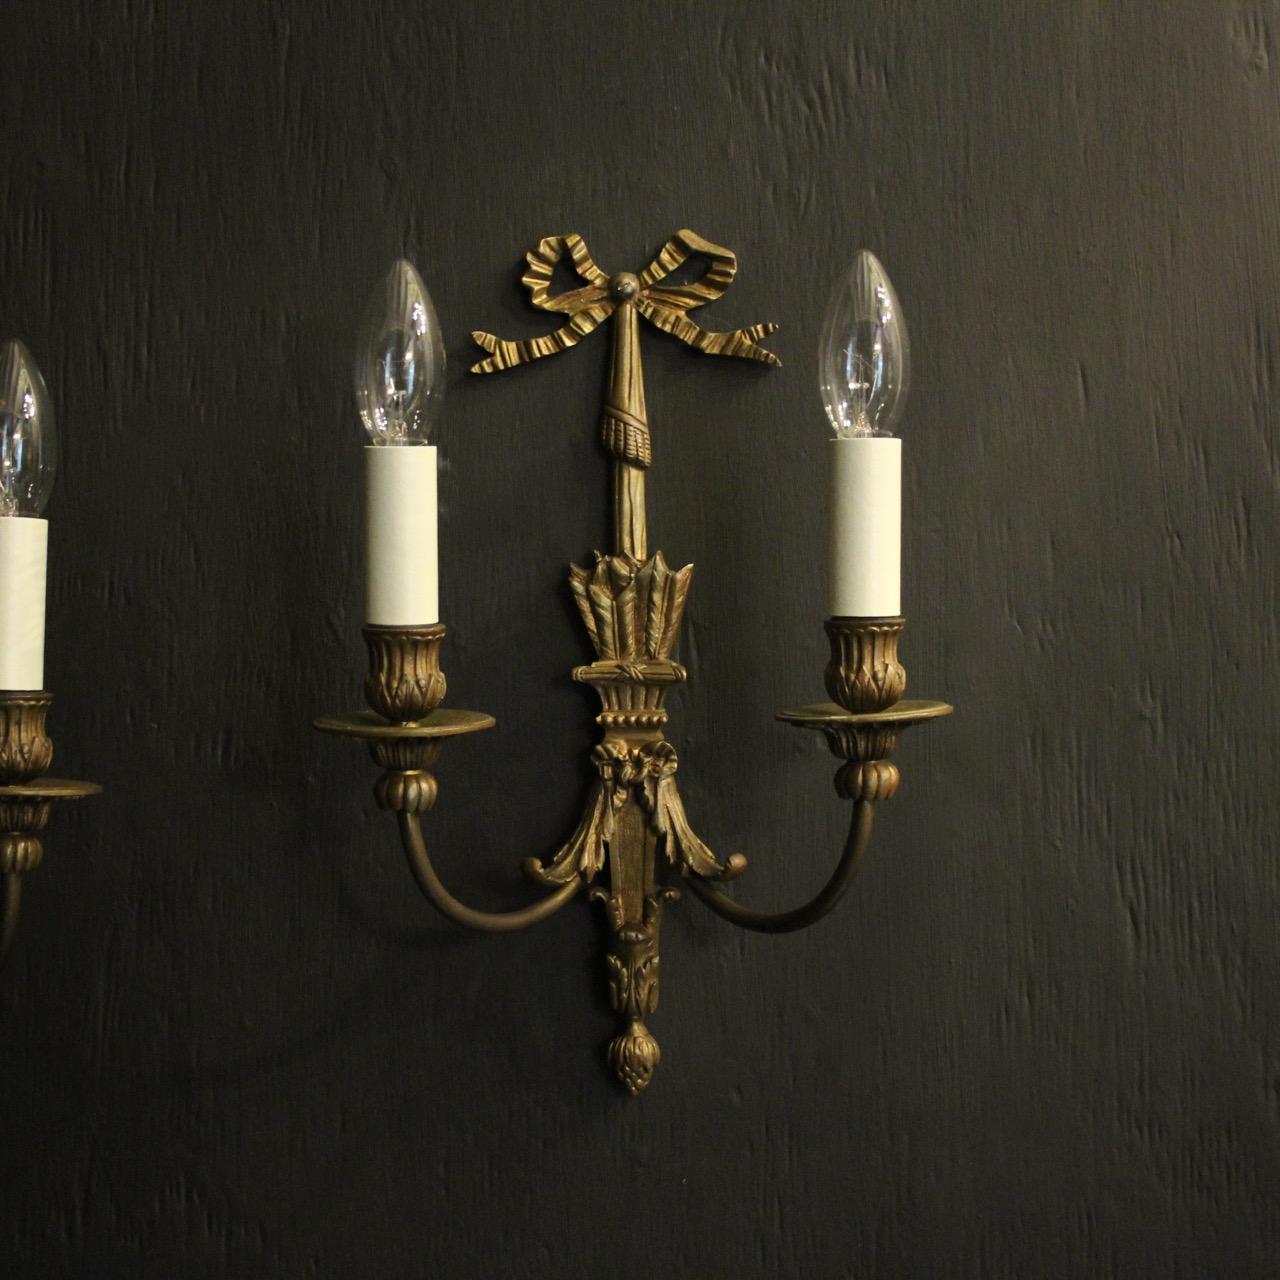 A French pair of gilded bronze twin arm antique wall lights, the scrolling arms with leaf bobeche drip pans and reeded candle sconces, issuing from an ornate tapering arrow sheath back plate with pierced ribbon finial, nice proportions with good